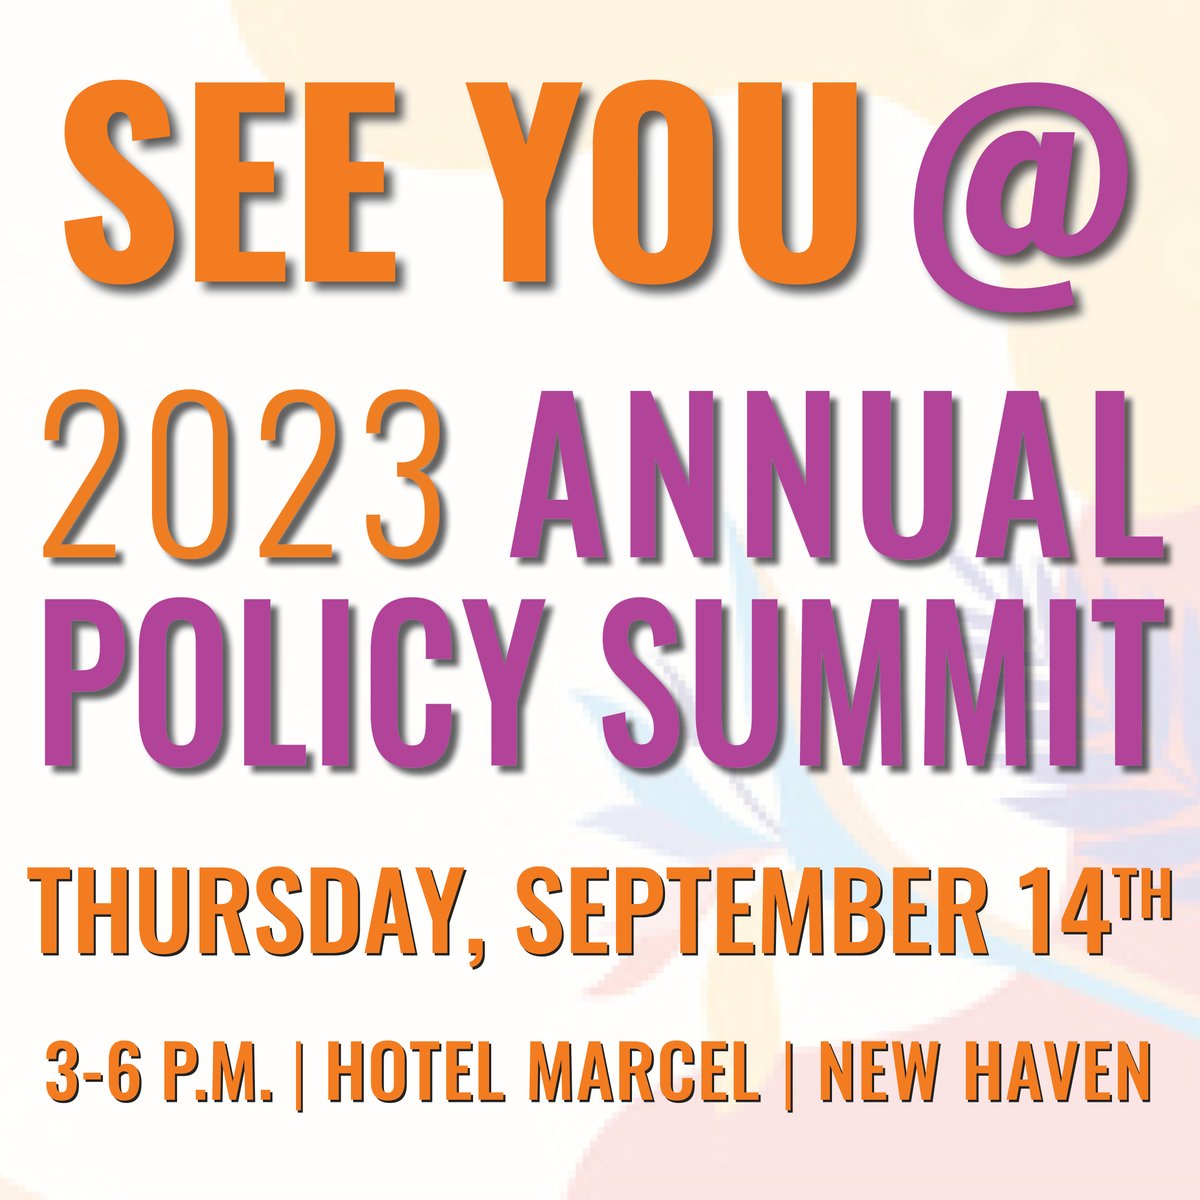 Don't miss out on the 2023 Policy Summit happening TOMORROW September 14th at 3PM! This is your chance to be part of the conversation that can shape our future!
Register here: hubs.li/Q022795G0
#PolicySummit2023 #ImpactfulChange #gnhcc